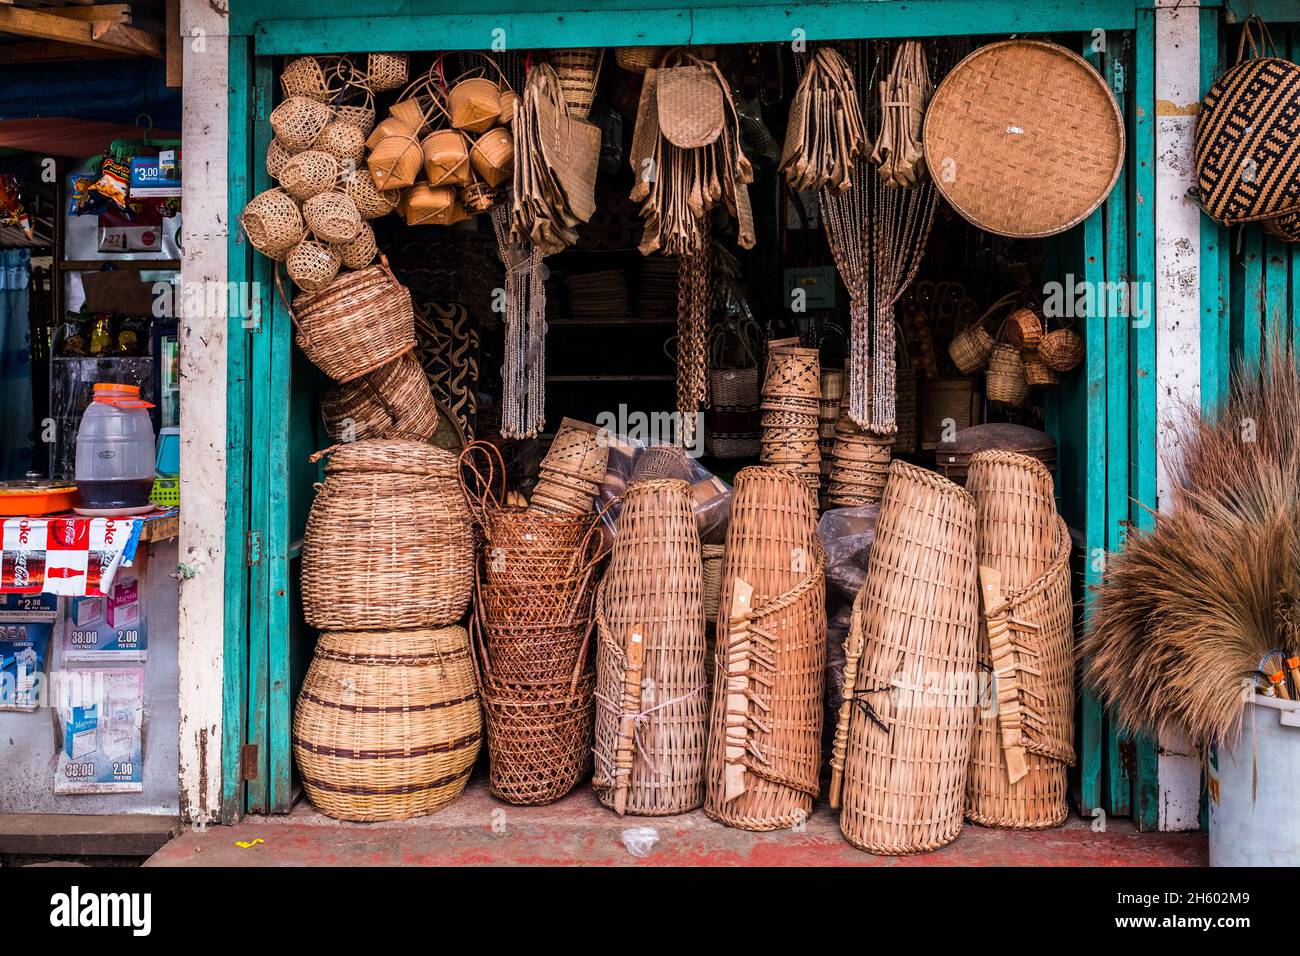 July 2017. Local rattan products, such as baskets of various sizes, for sale in Puerto Princesa, Palawan, Philippines. Stock Photo